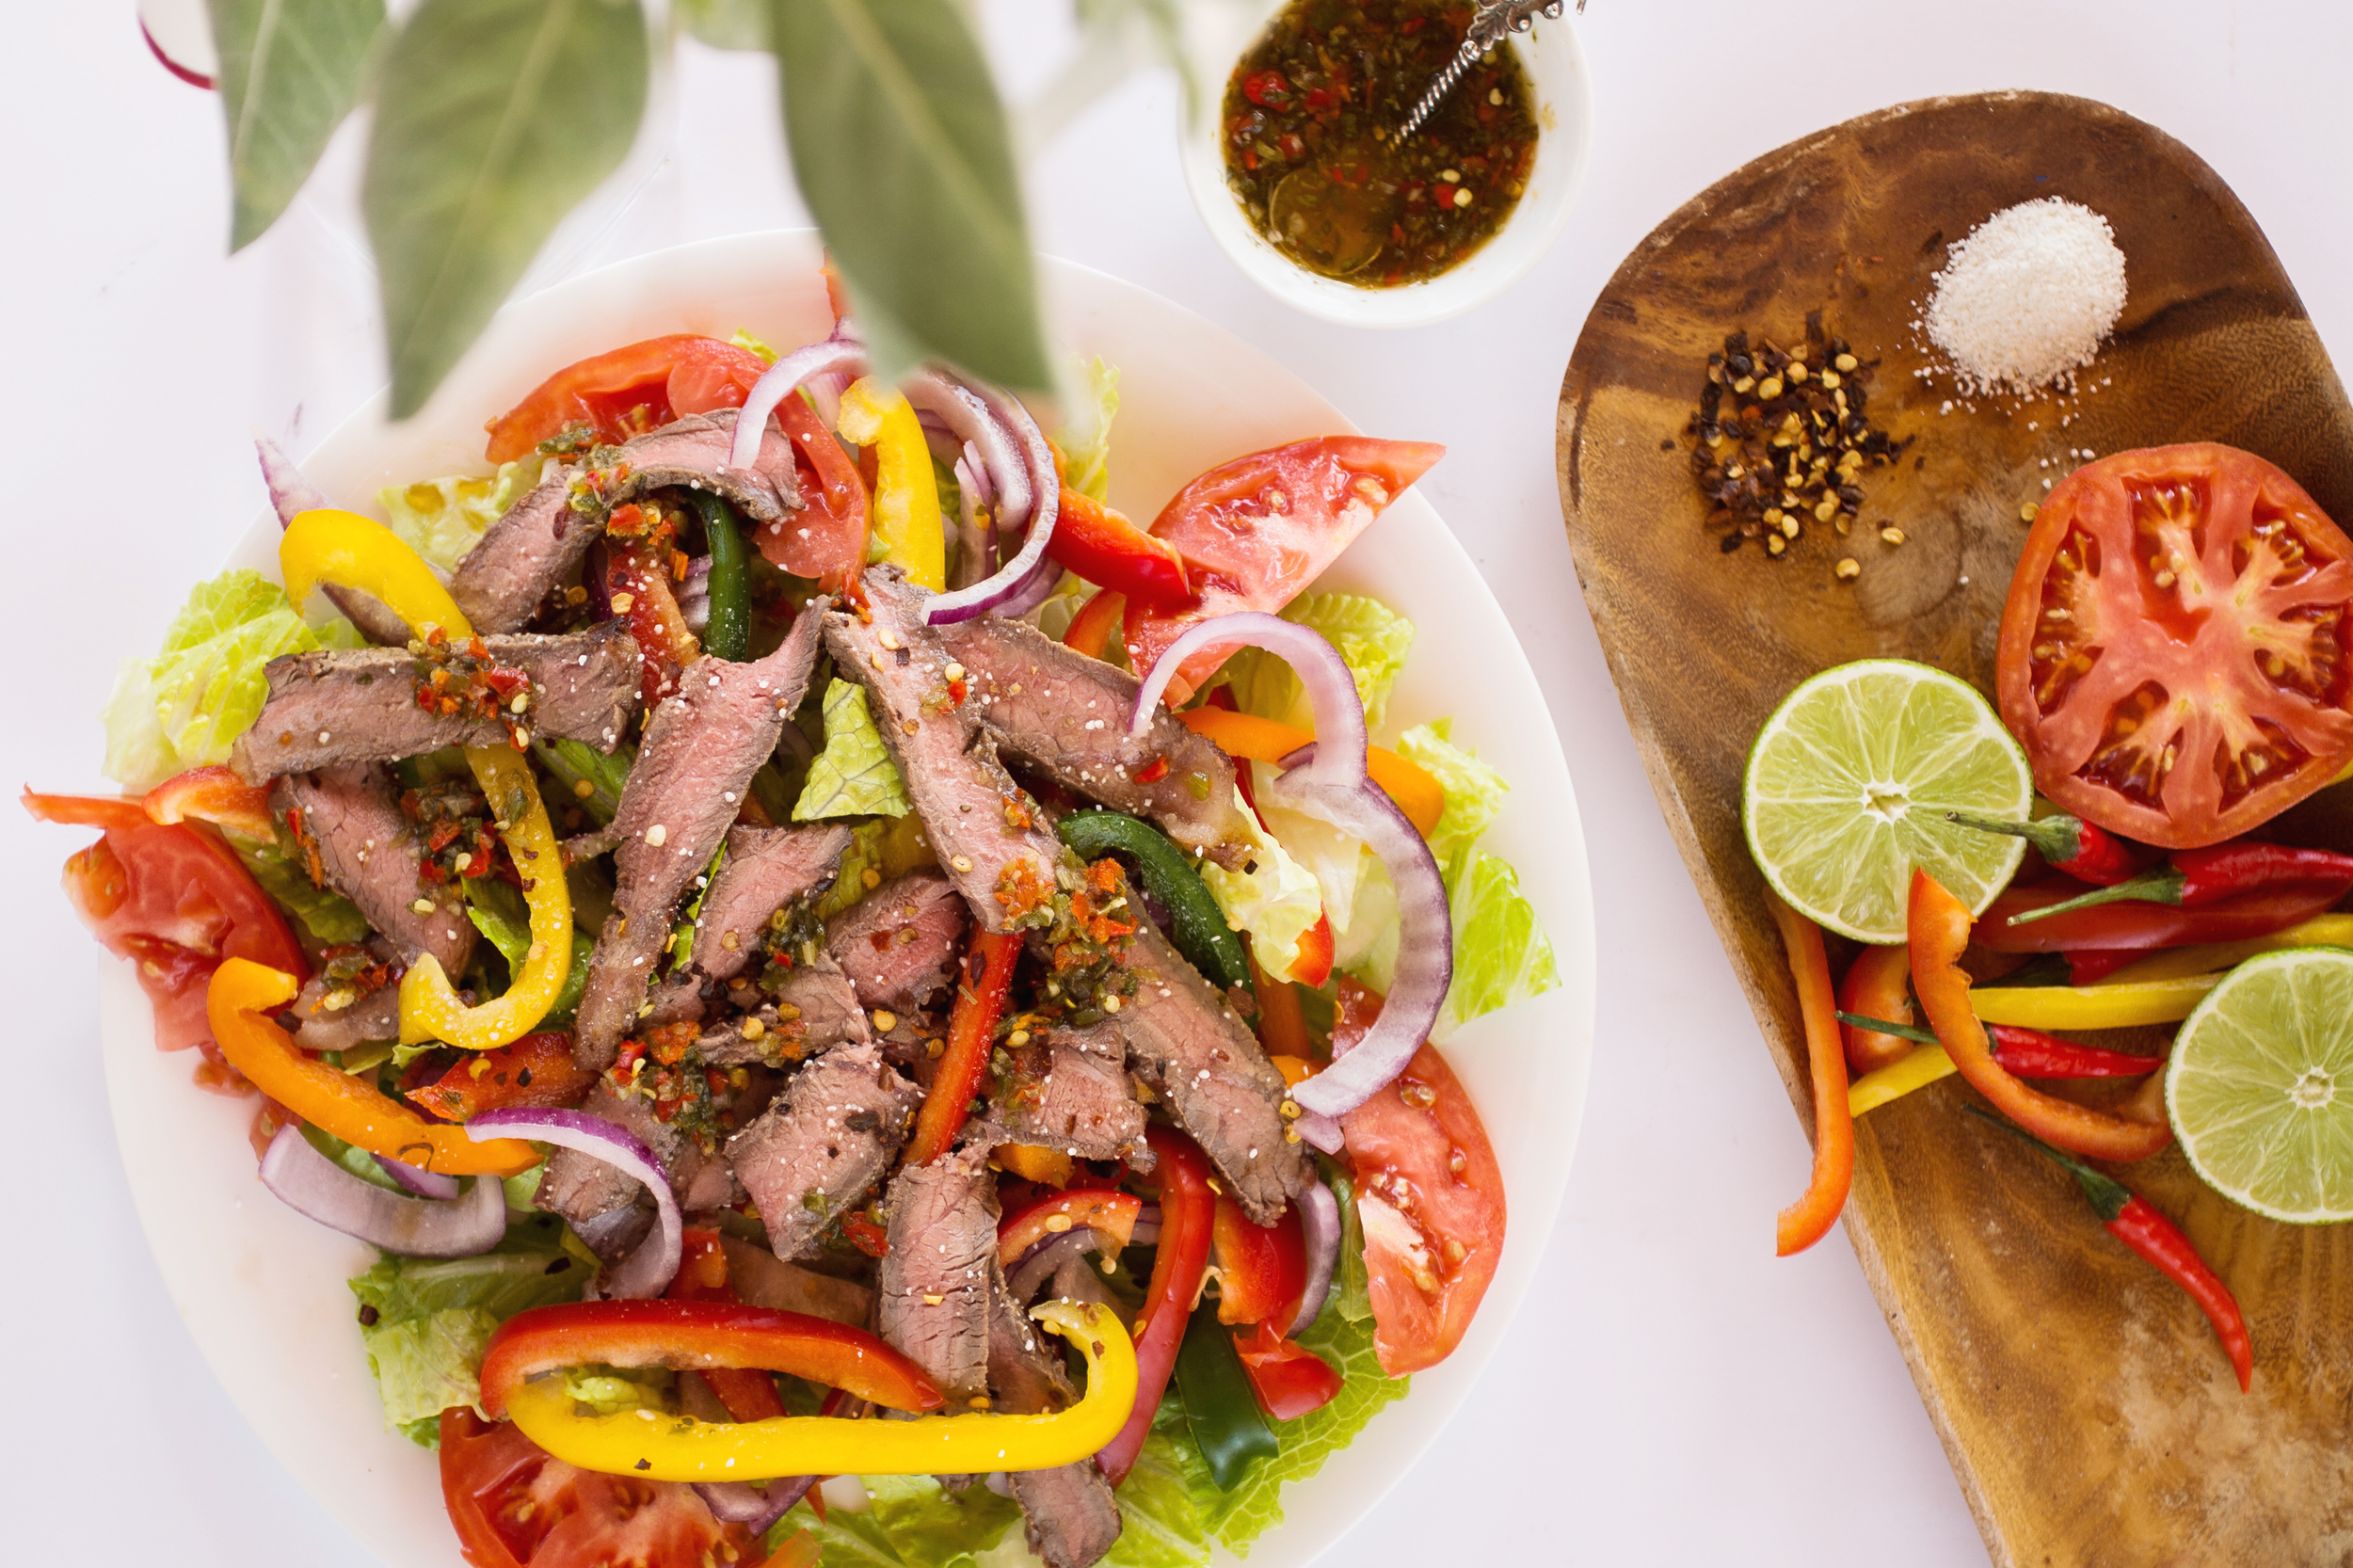 Coming Soon: Thai Beef Salad with Sauce 28